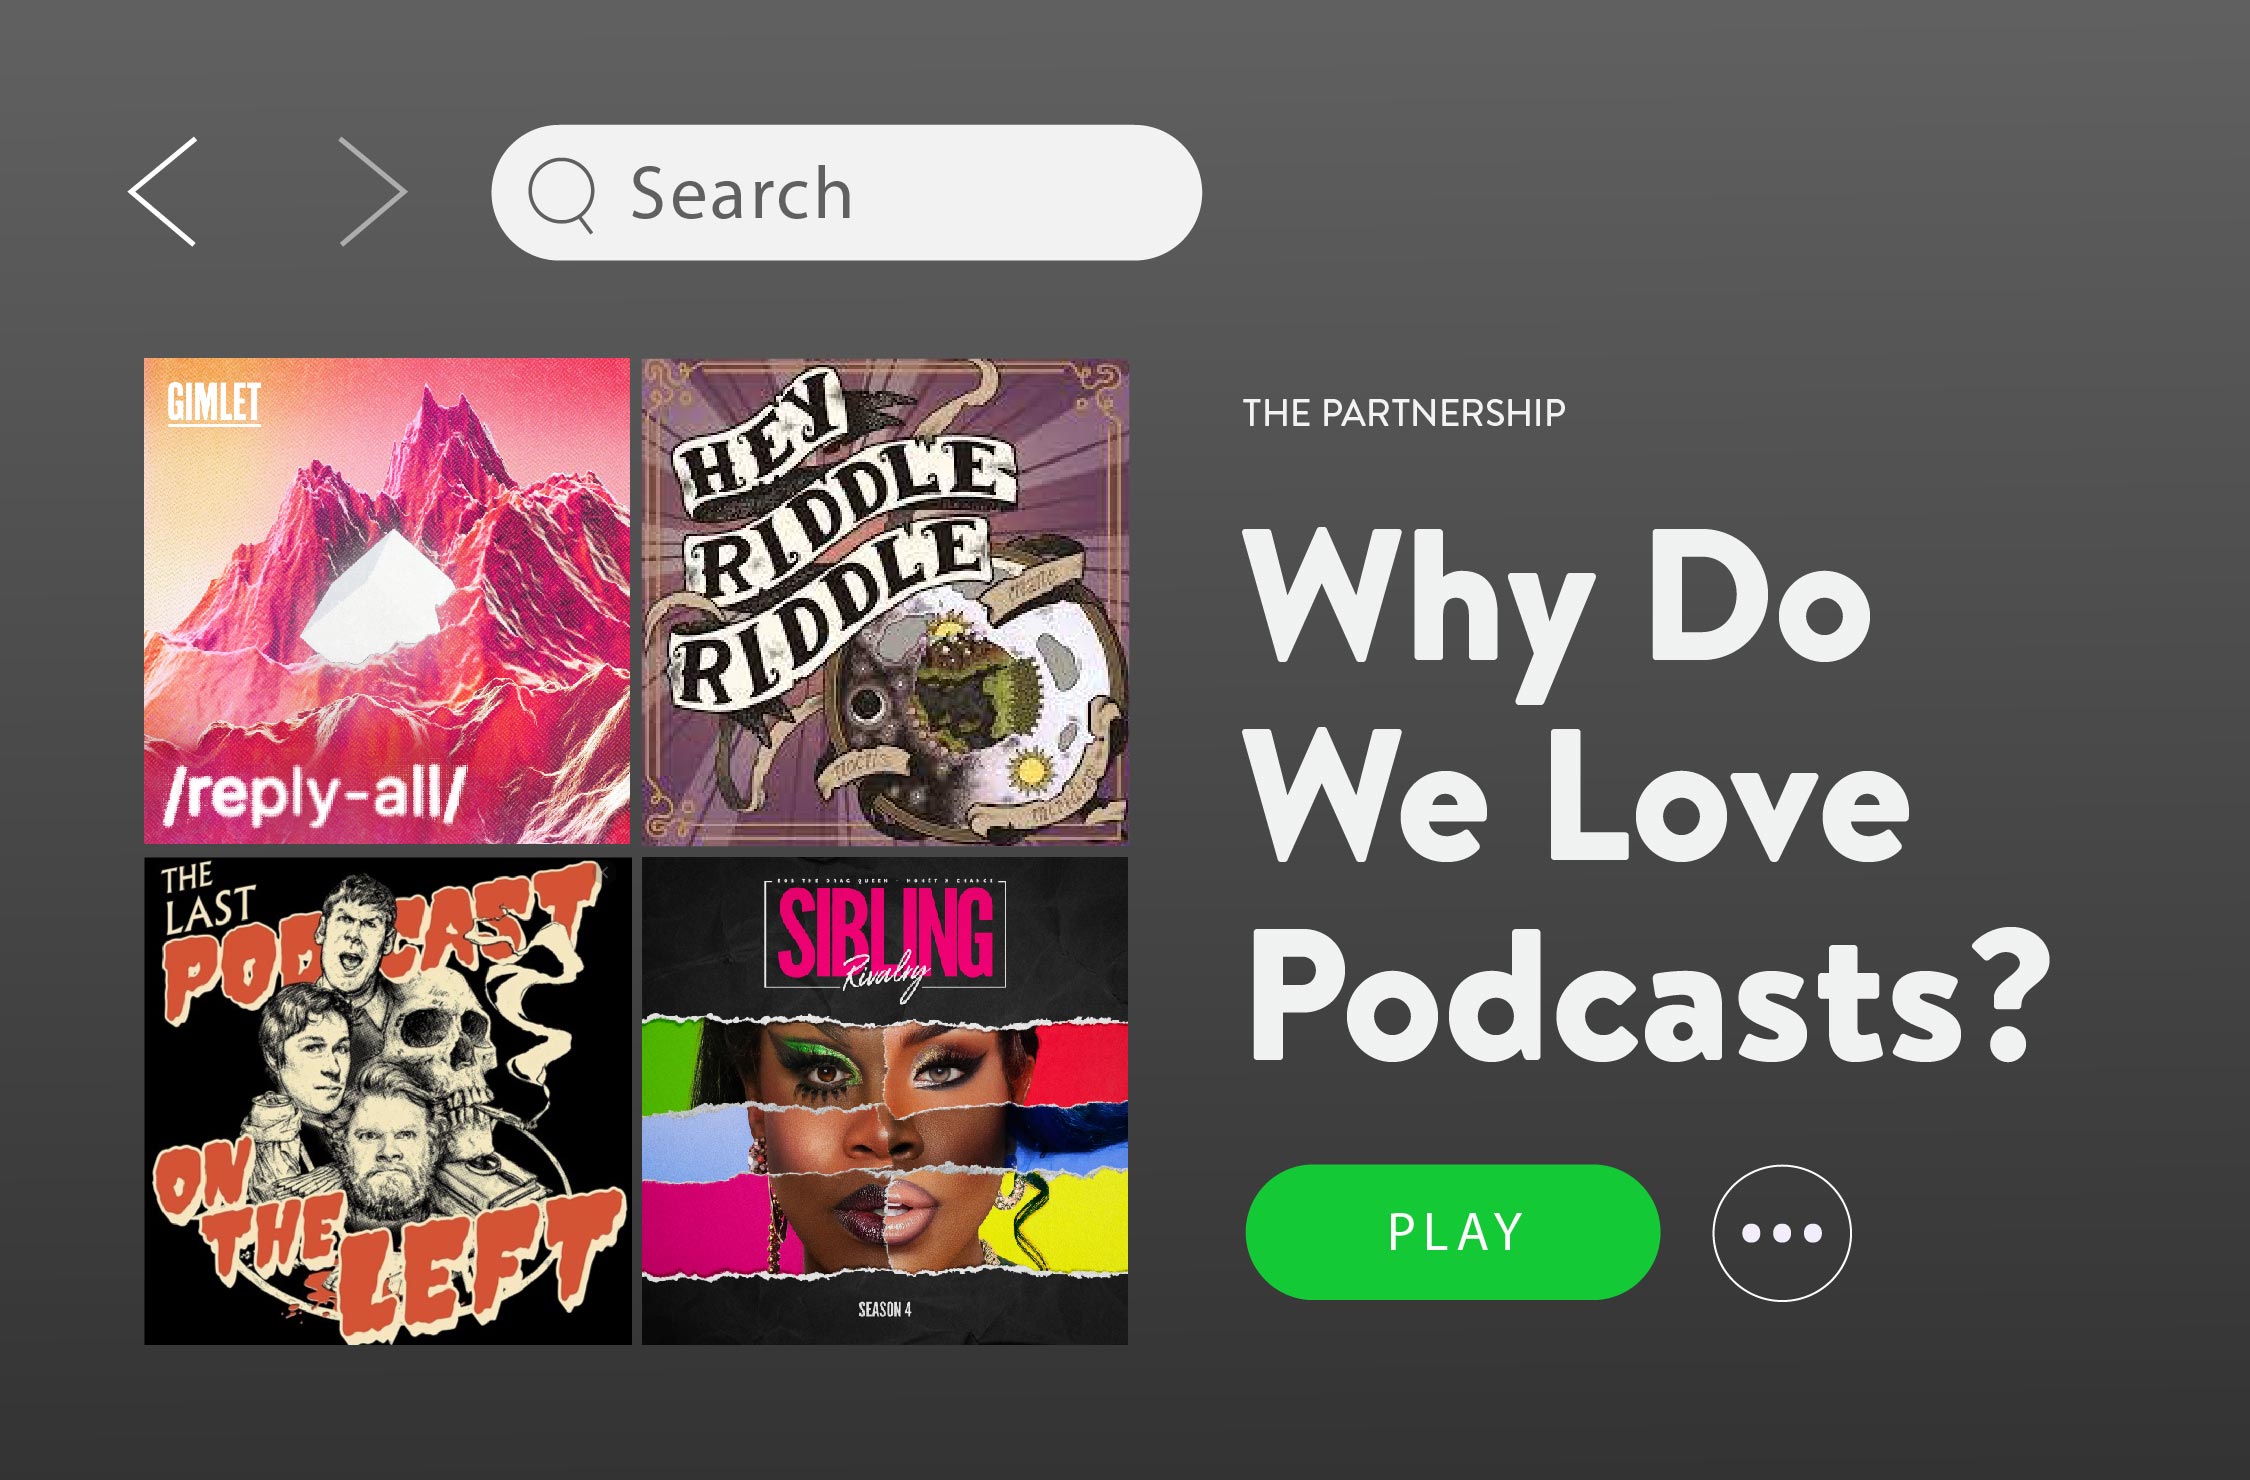 why do we love podcasts